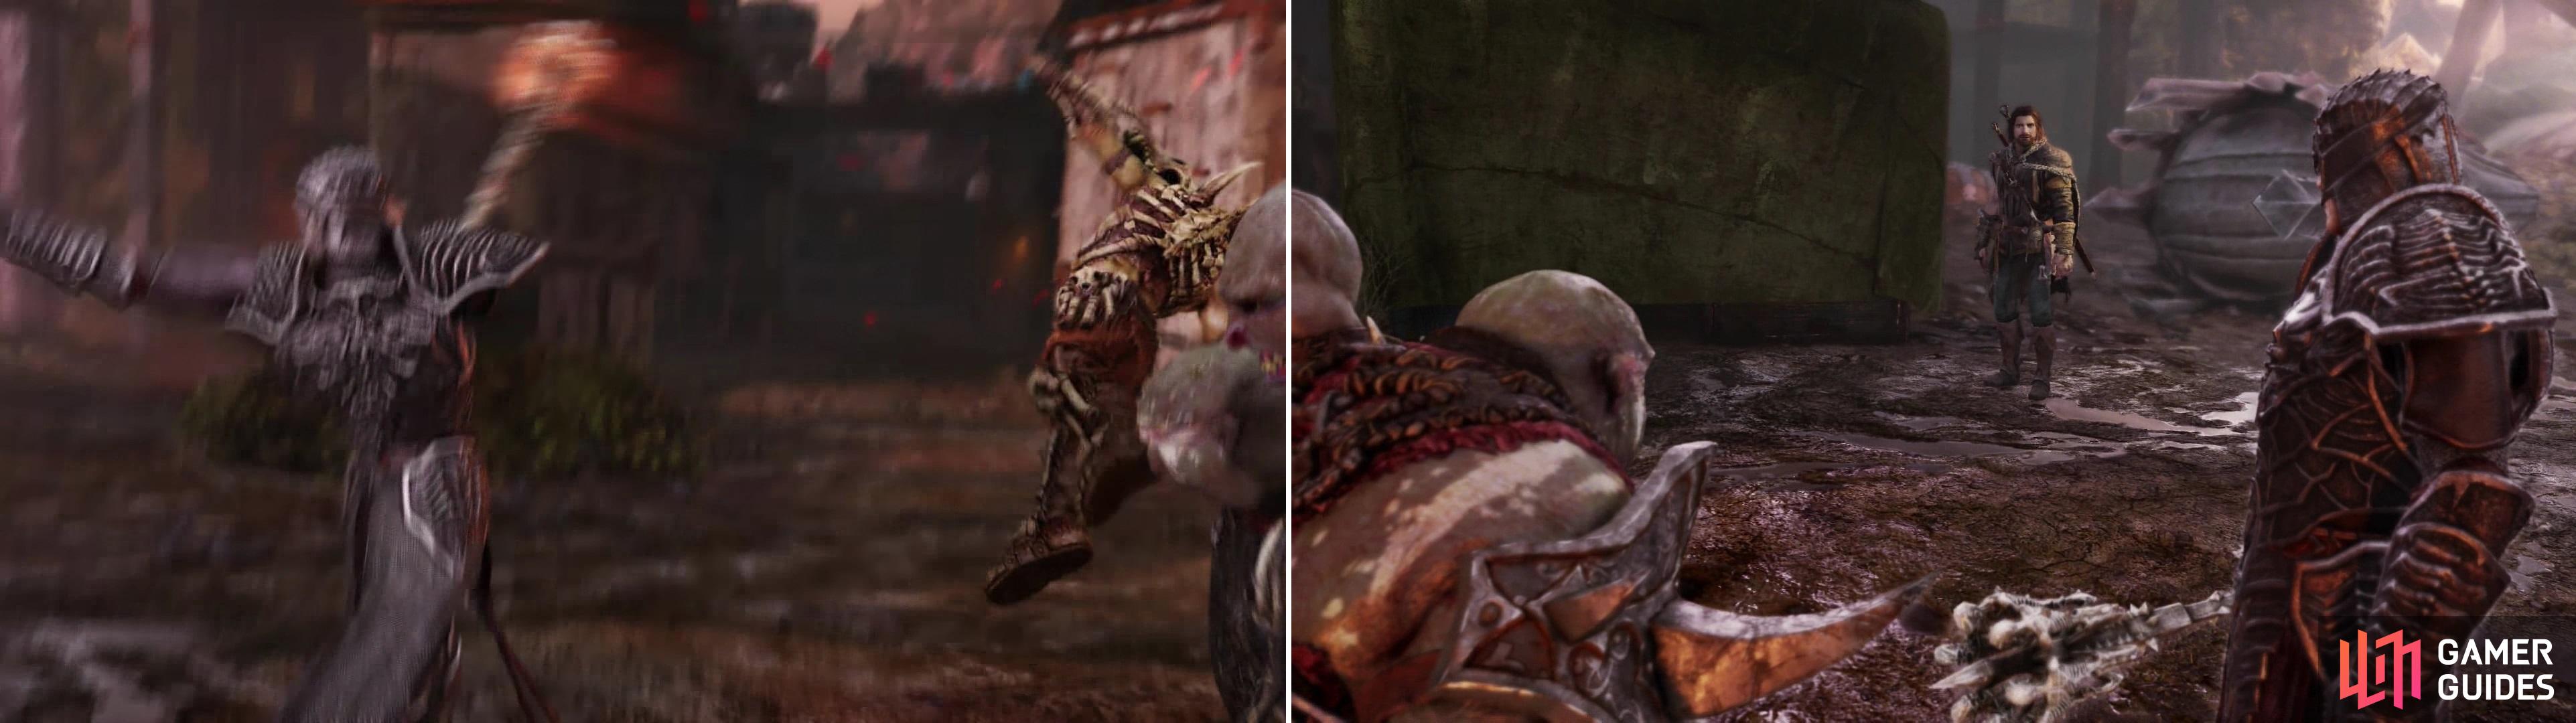 Ratbag learns the hard way that Sauron is less forgiving of incompetence than Talion was (left). The "Gravewalker" steps foward to answer The Hammer's challenge (right).